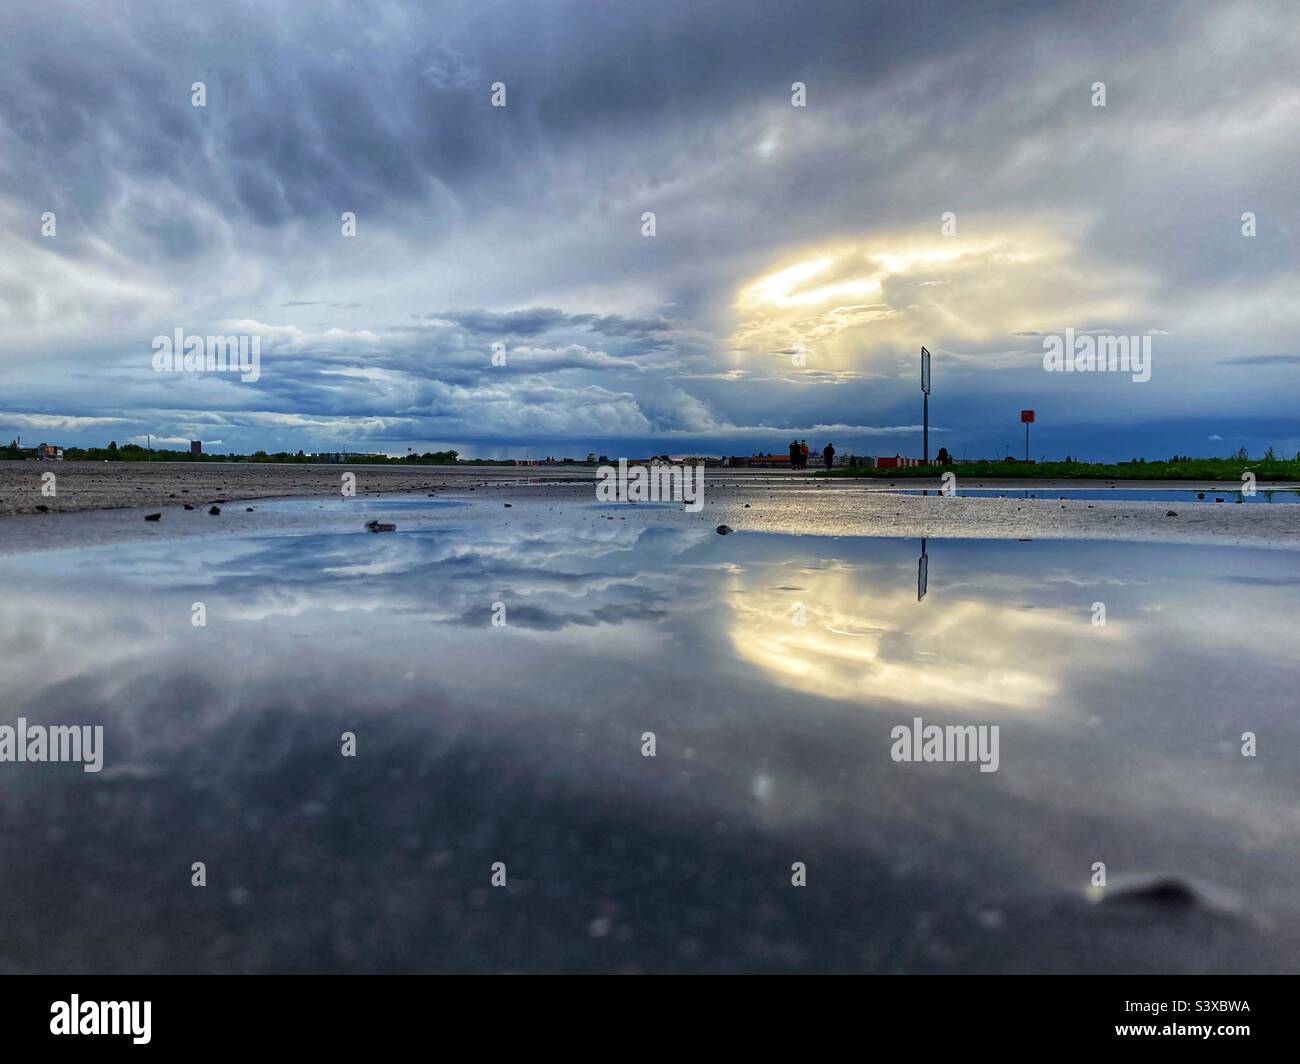 A dramatic Sky reflected in a puddle on Tempelhofer Feld, Berlin, Germany Stock Photo